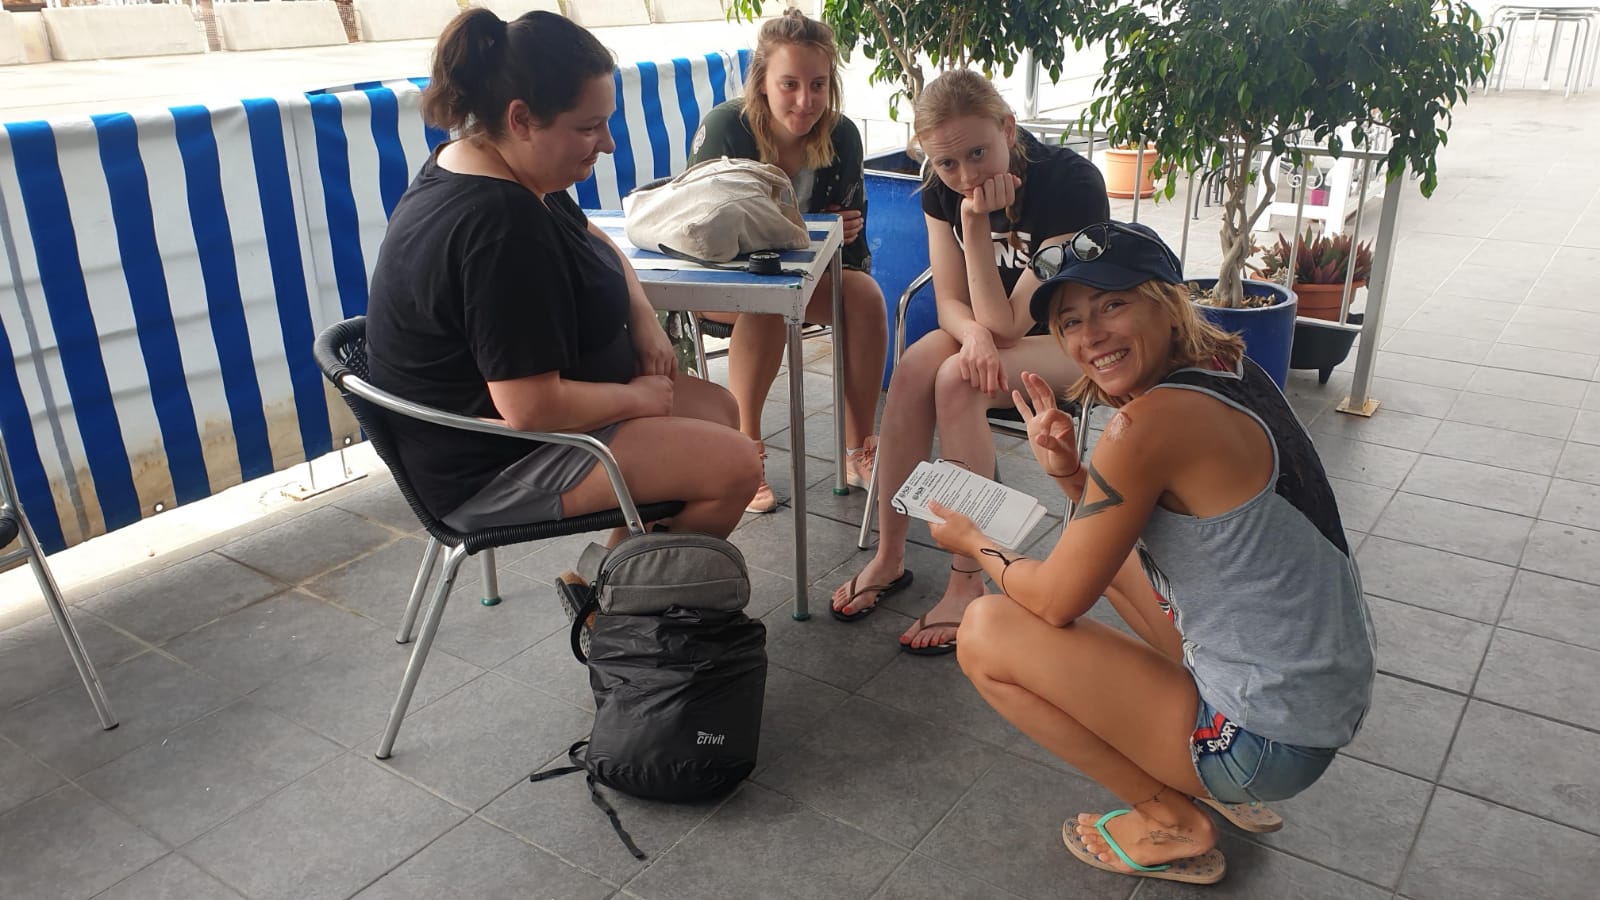 Briefing for PADI Open Water students